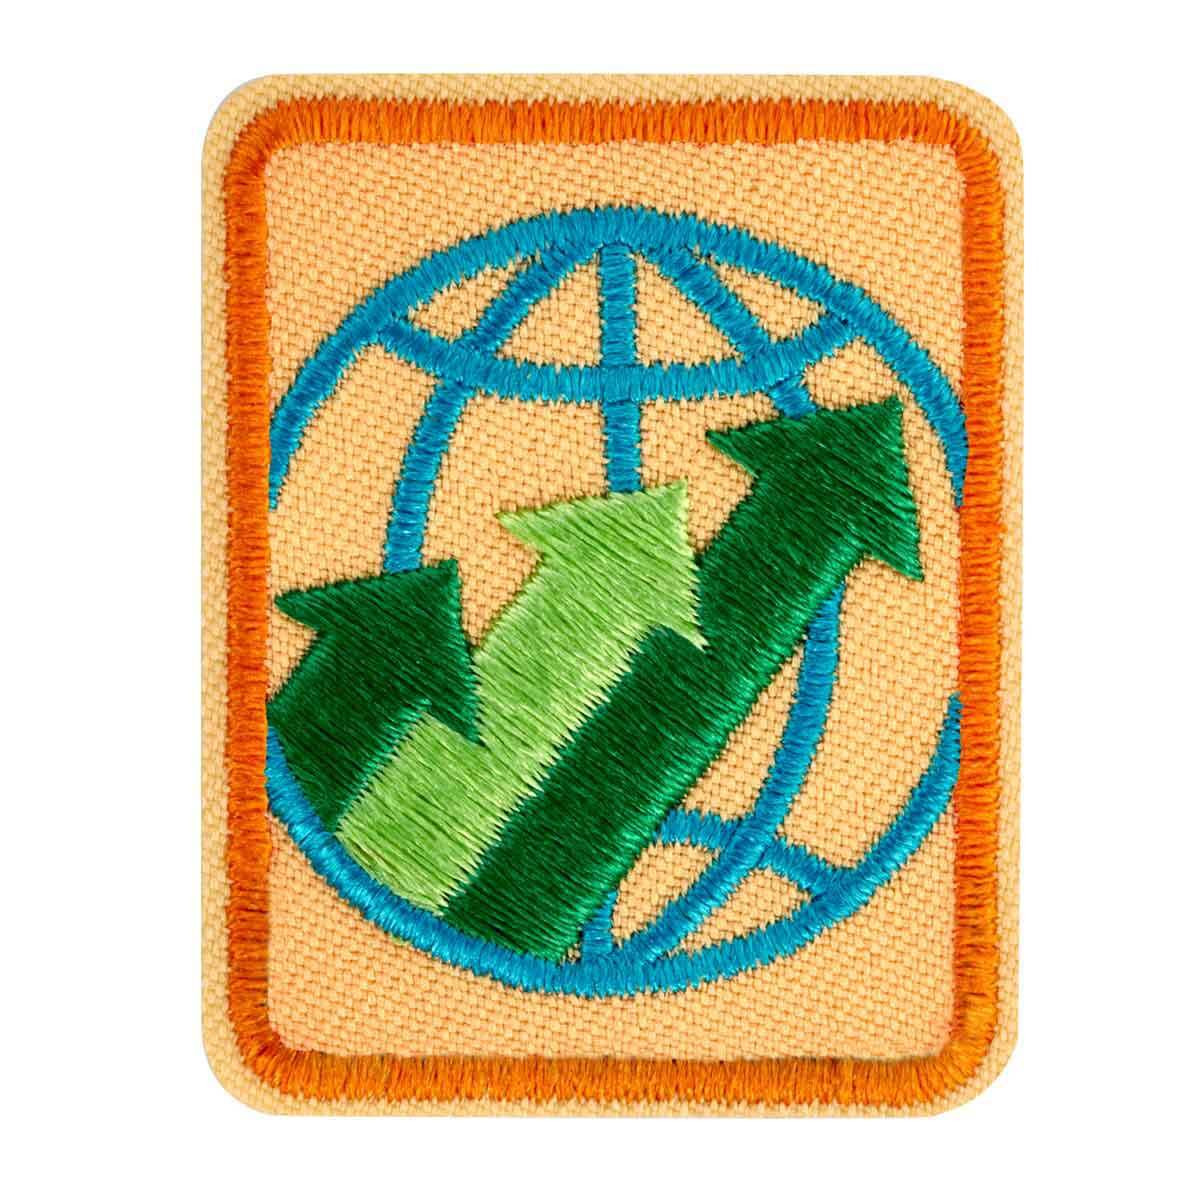 Earn the Global Action Award Girl Scouts